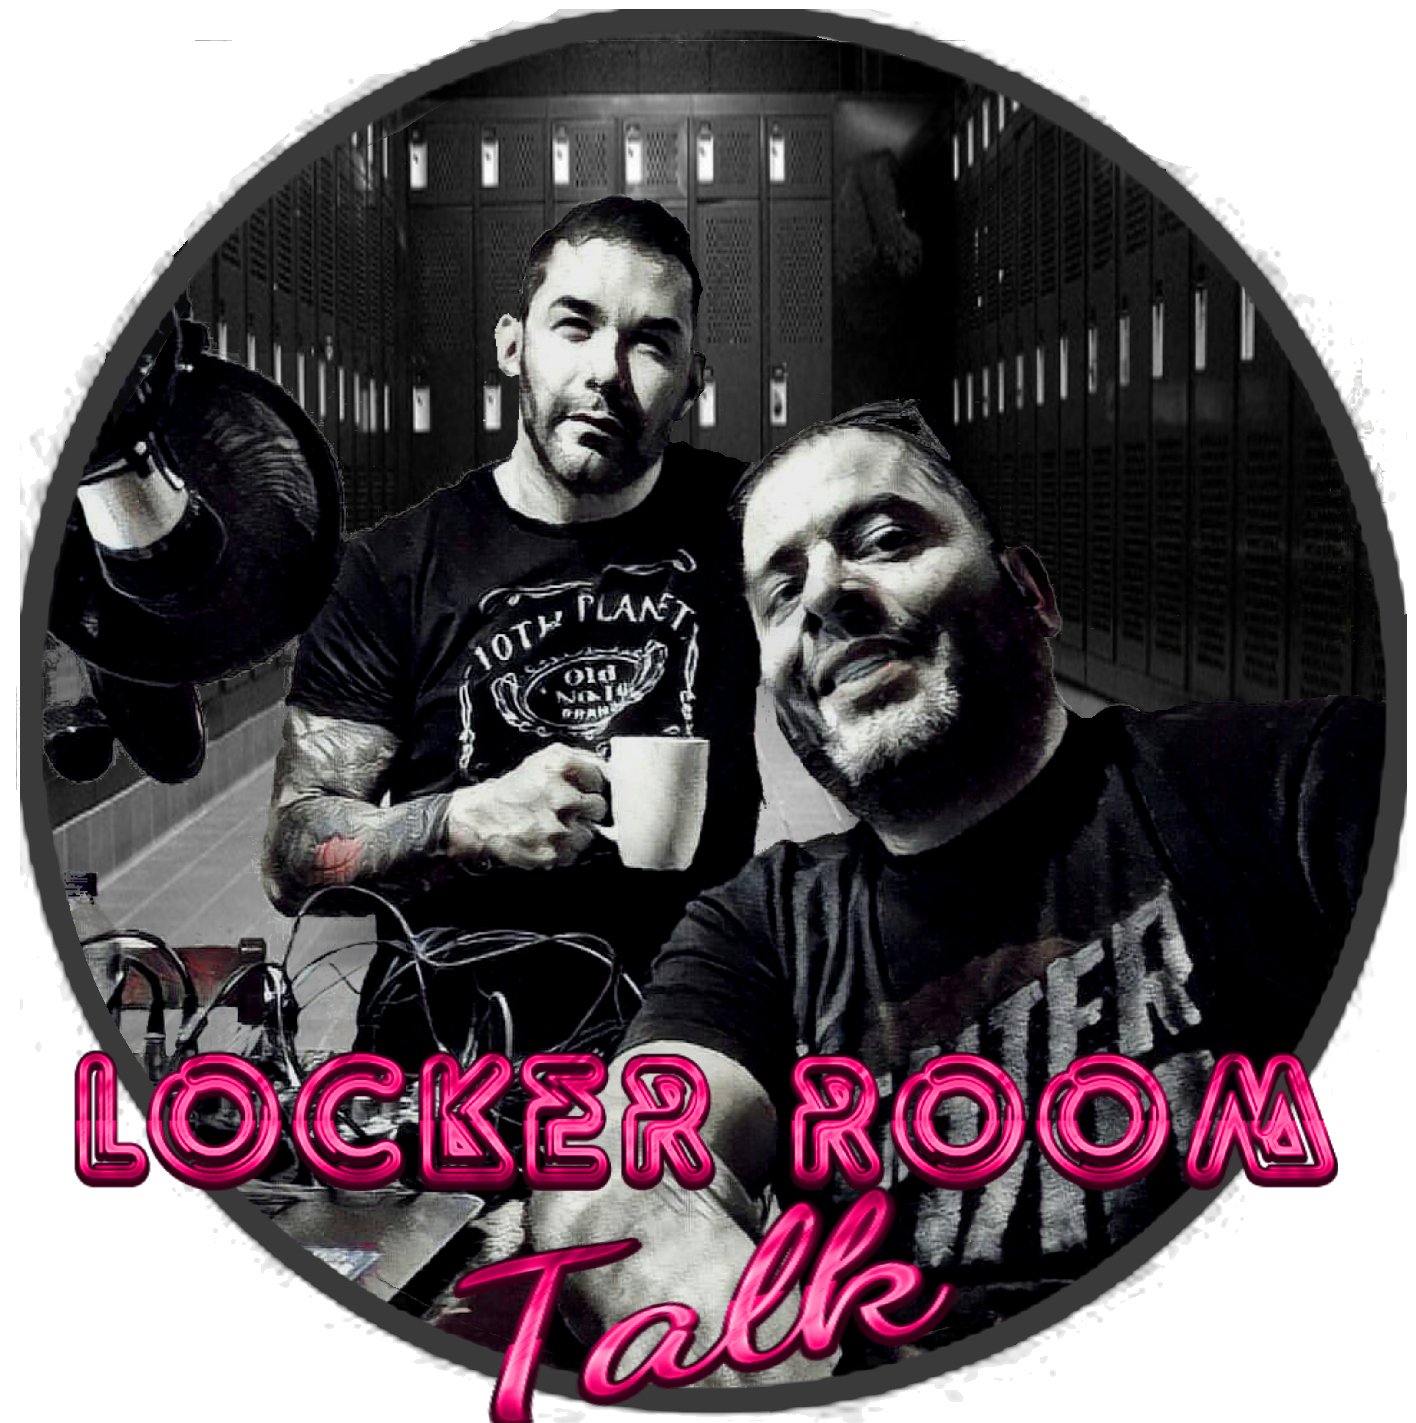 Locker Room Talk Episode #45 - Colorado bud, Glowing piss and Basic bitches